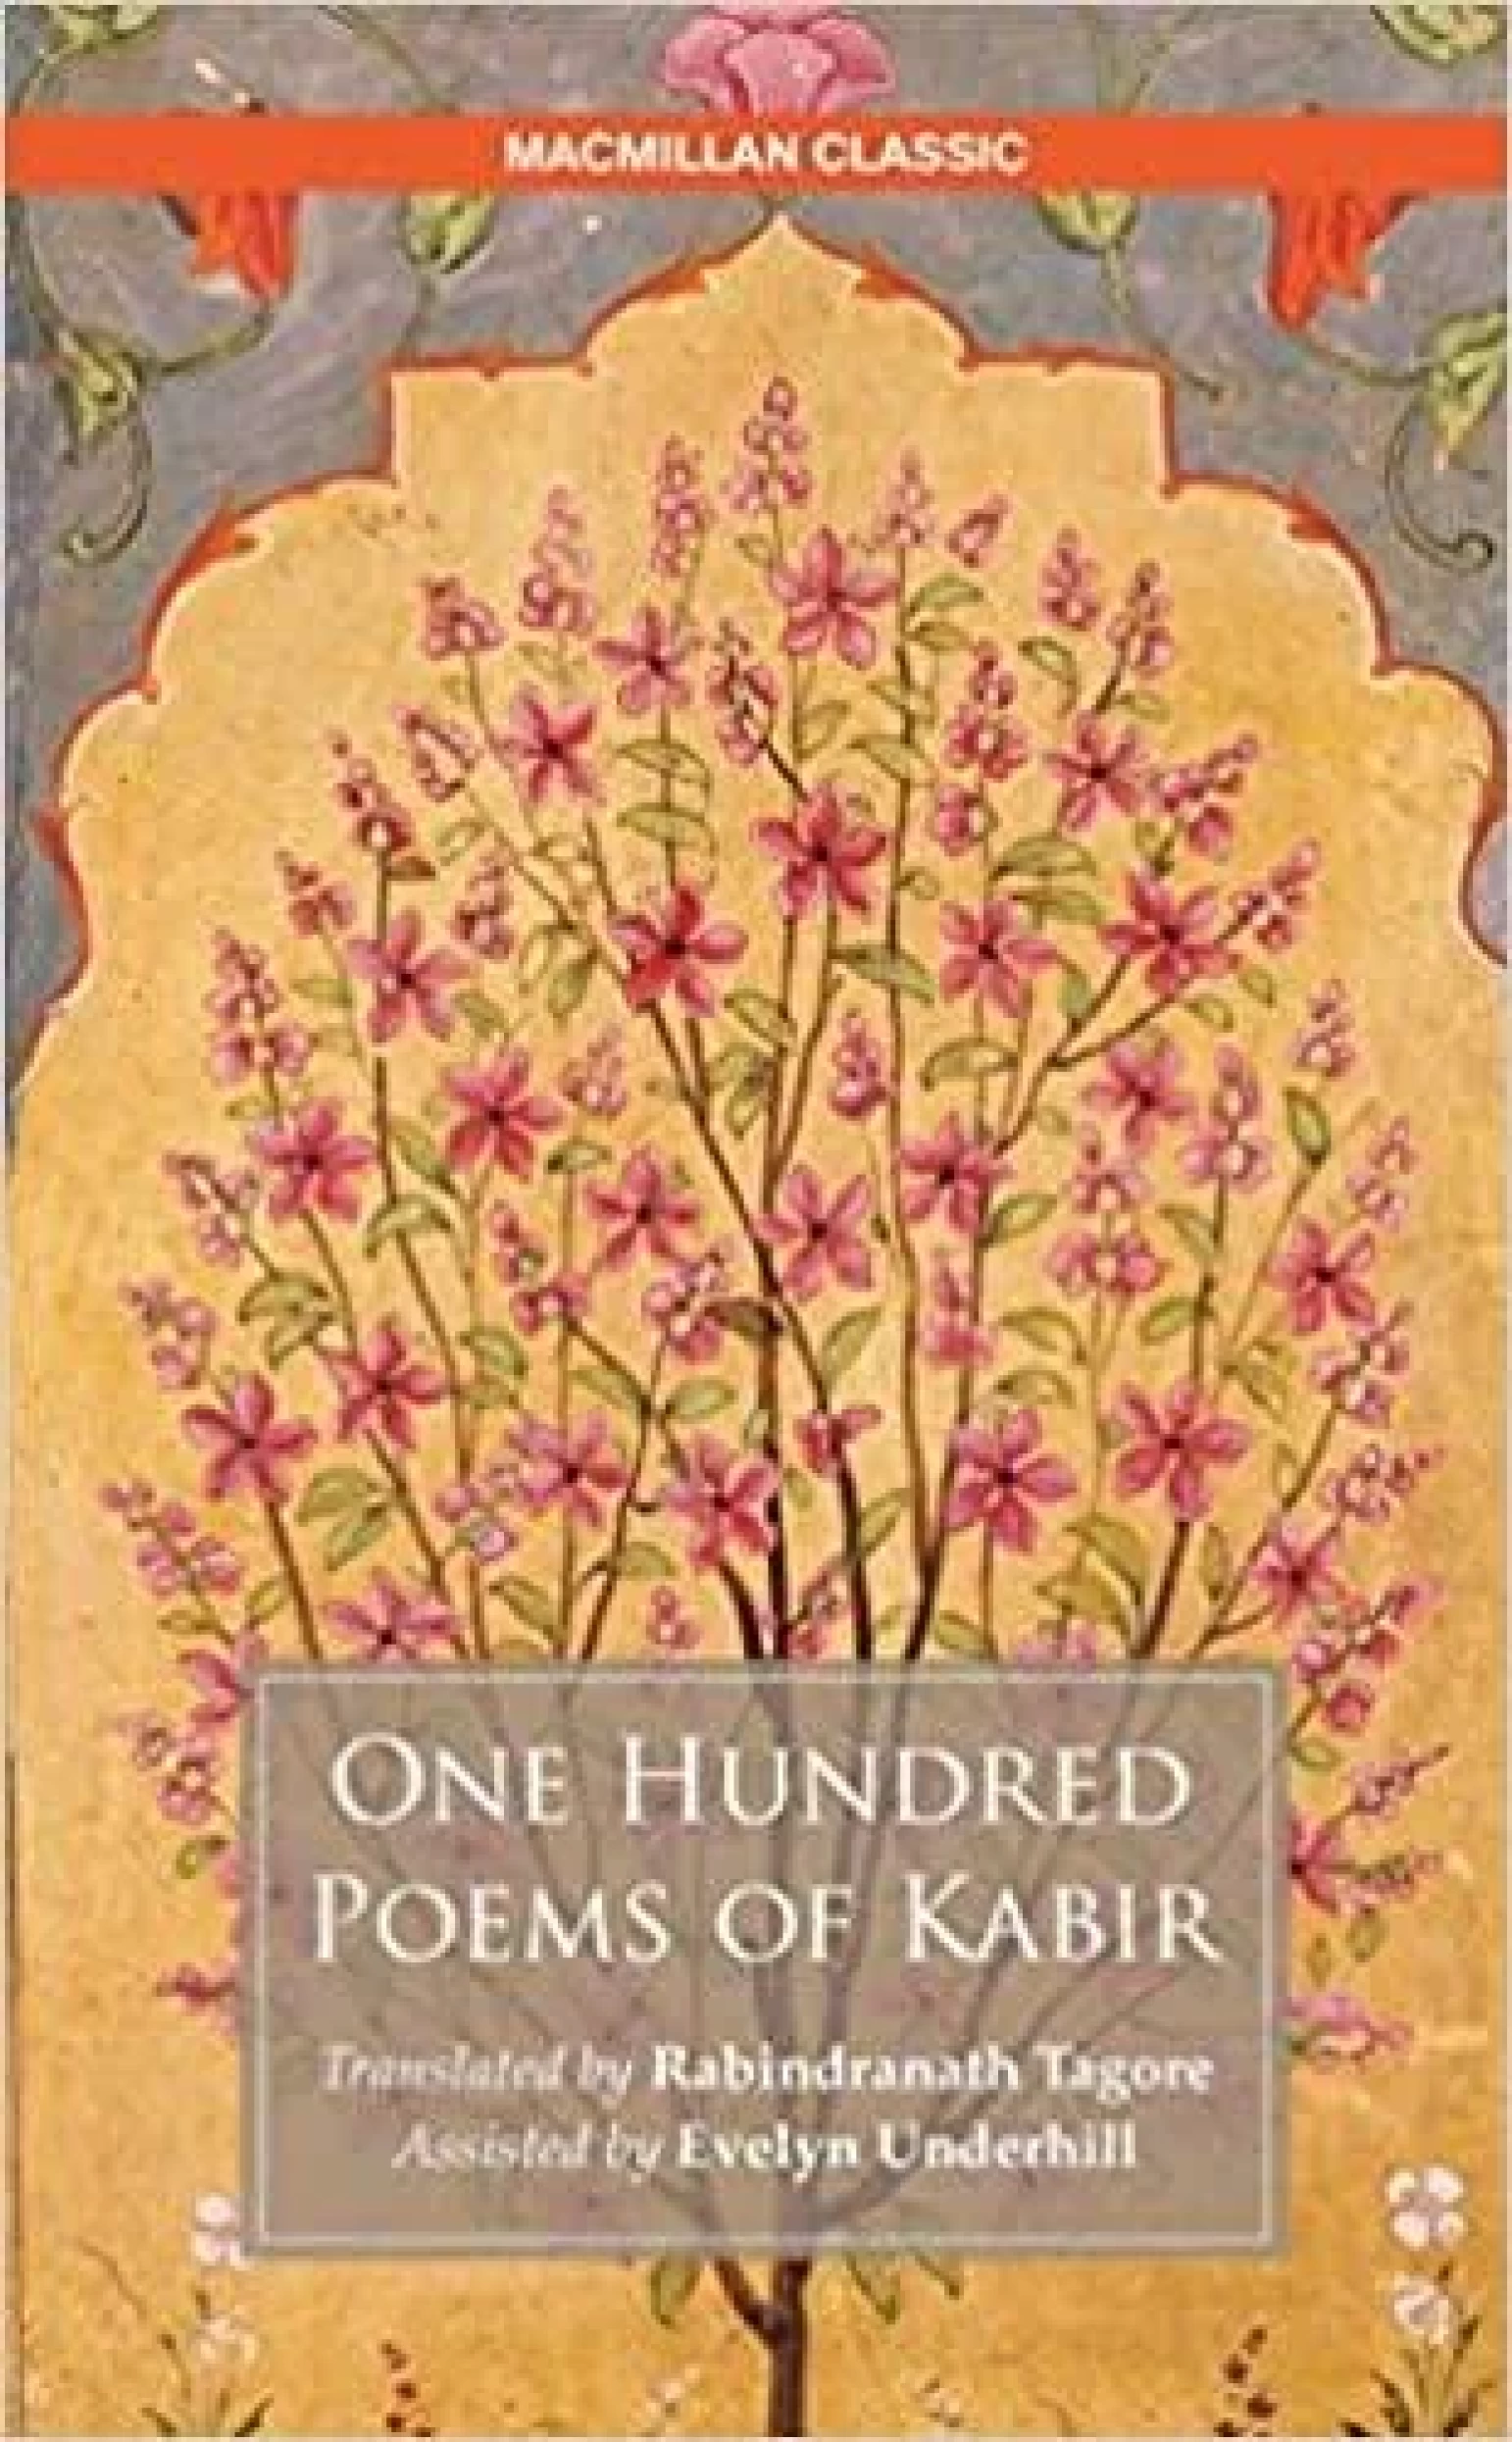 One Hundred Poems of Kabir by Translated By Rabindranath Tagore